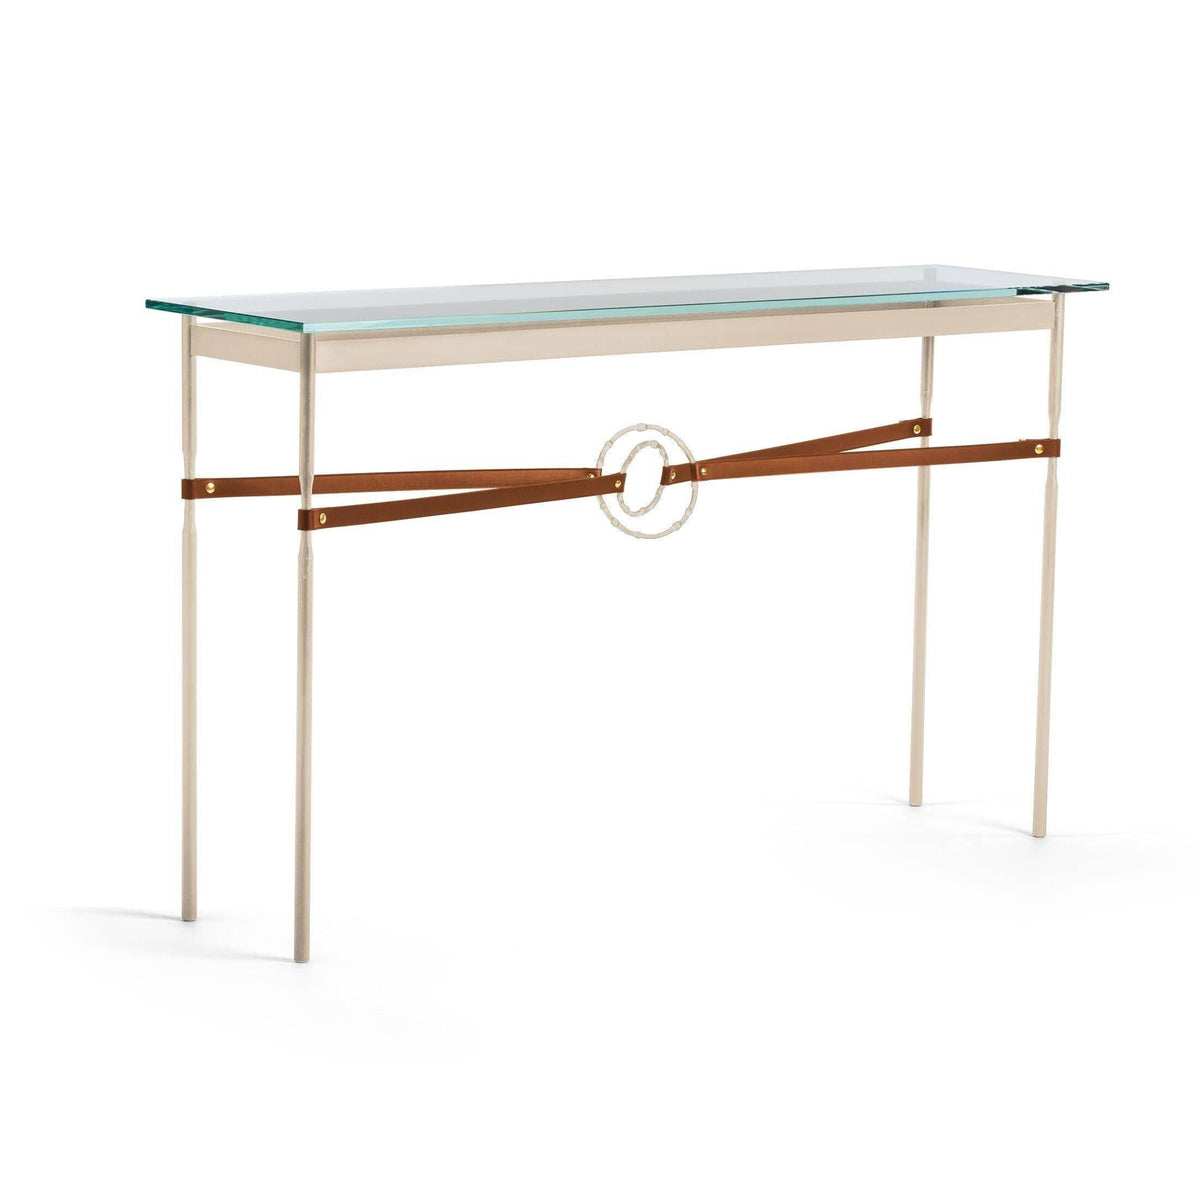 Hubbardton Forge - Equus Chestnut Leather Console Table - 750118-84-84-LC-VA0714 | Montreal Lighting & Hardware